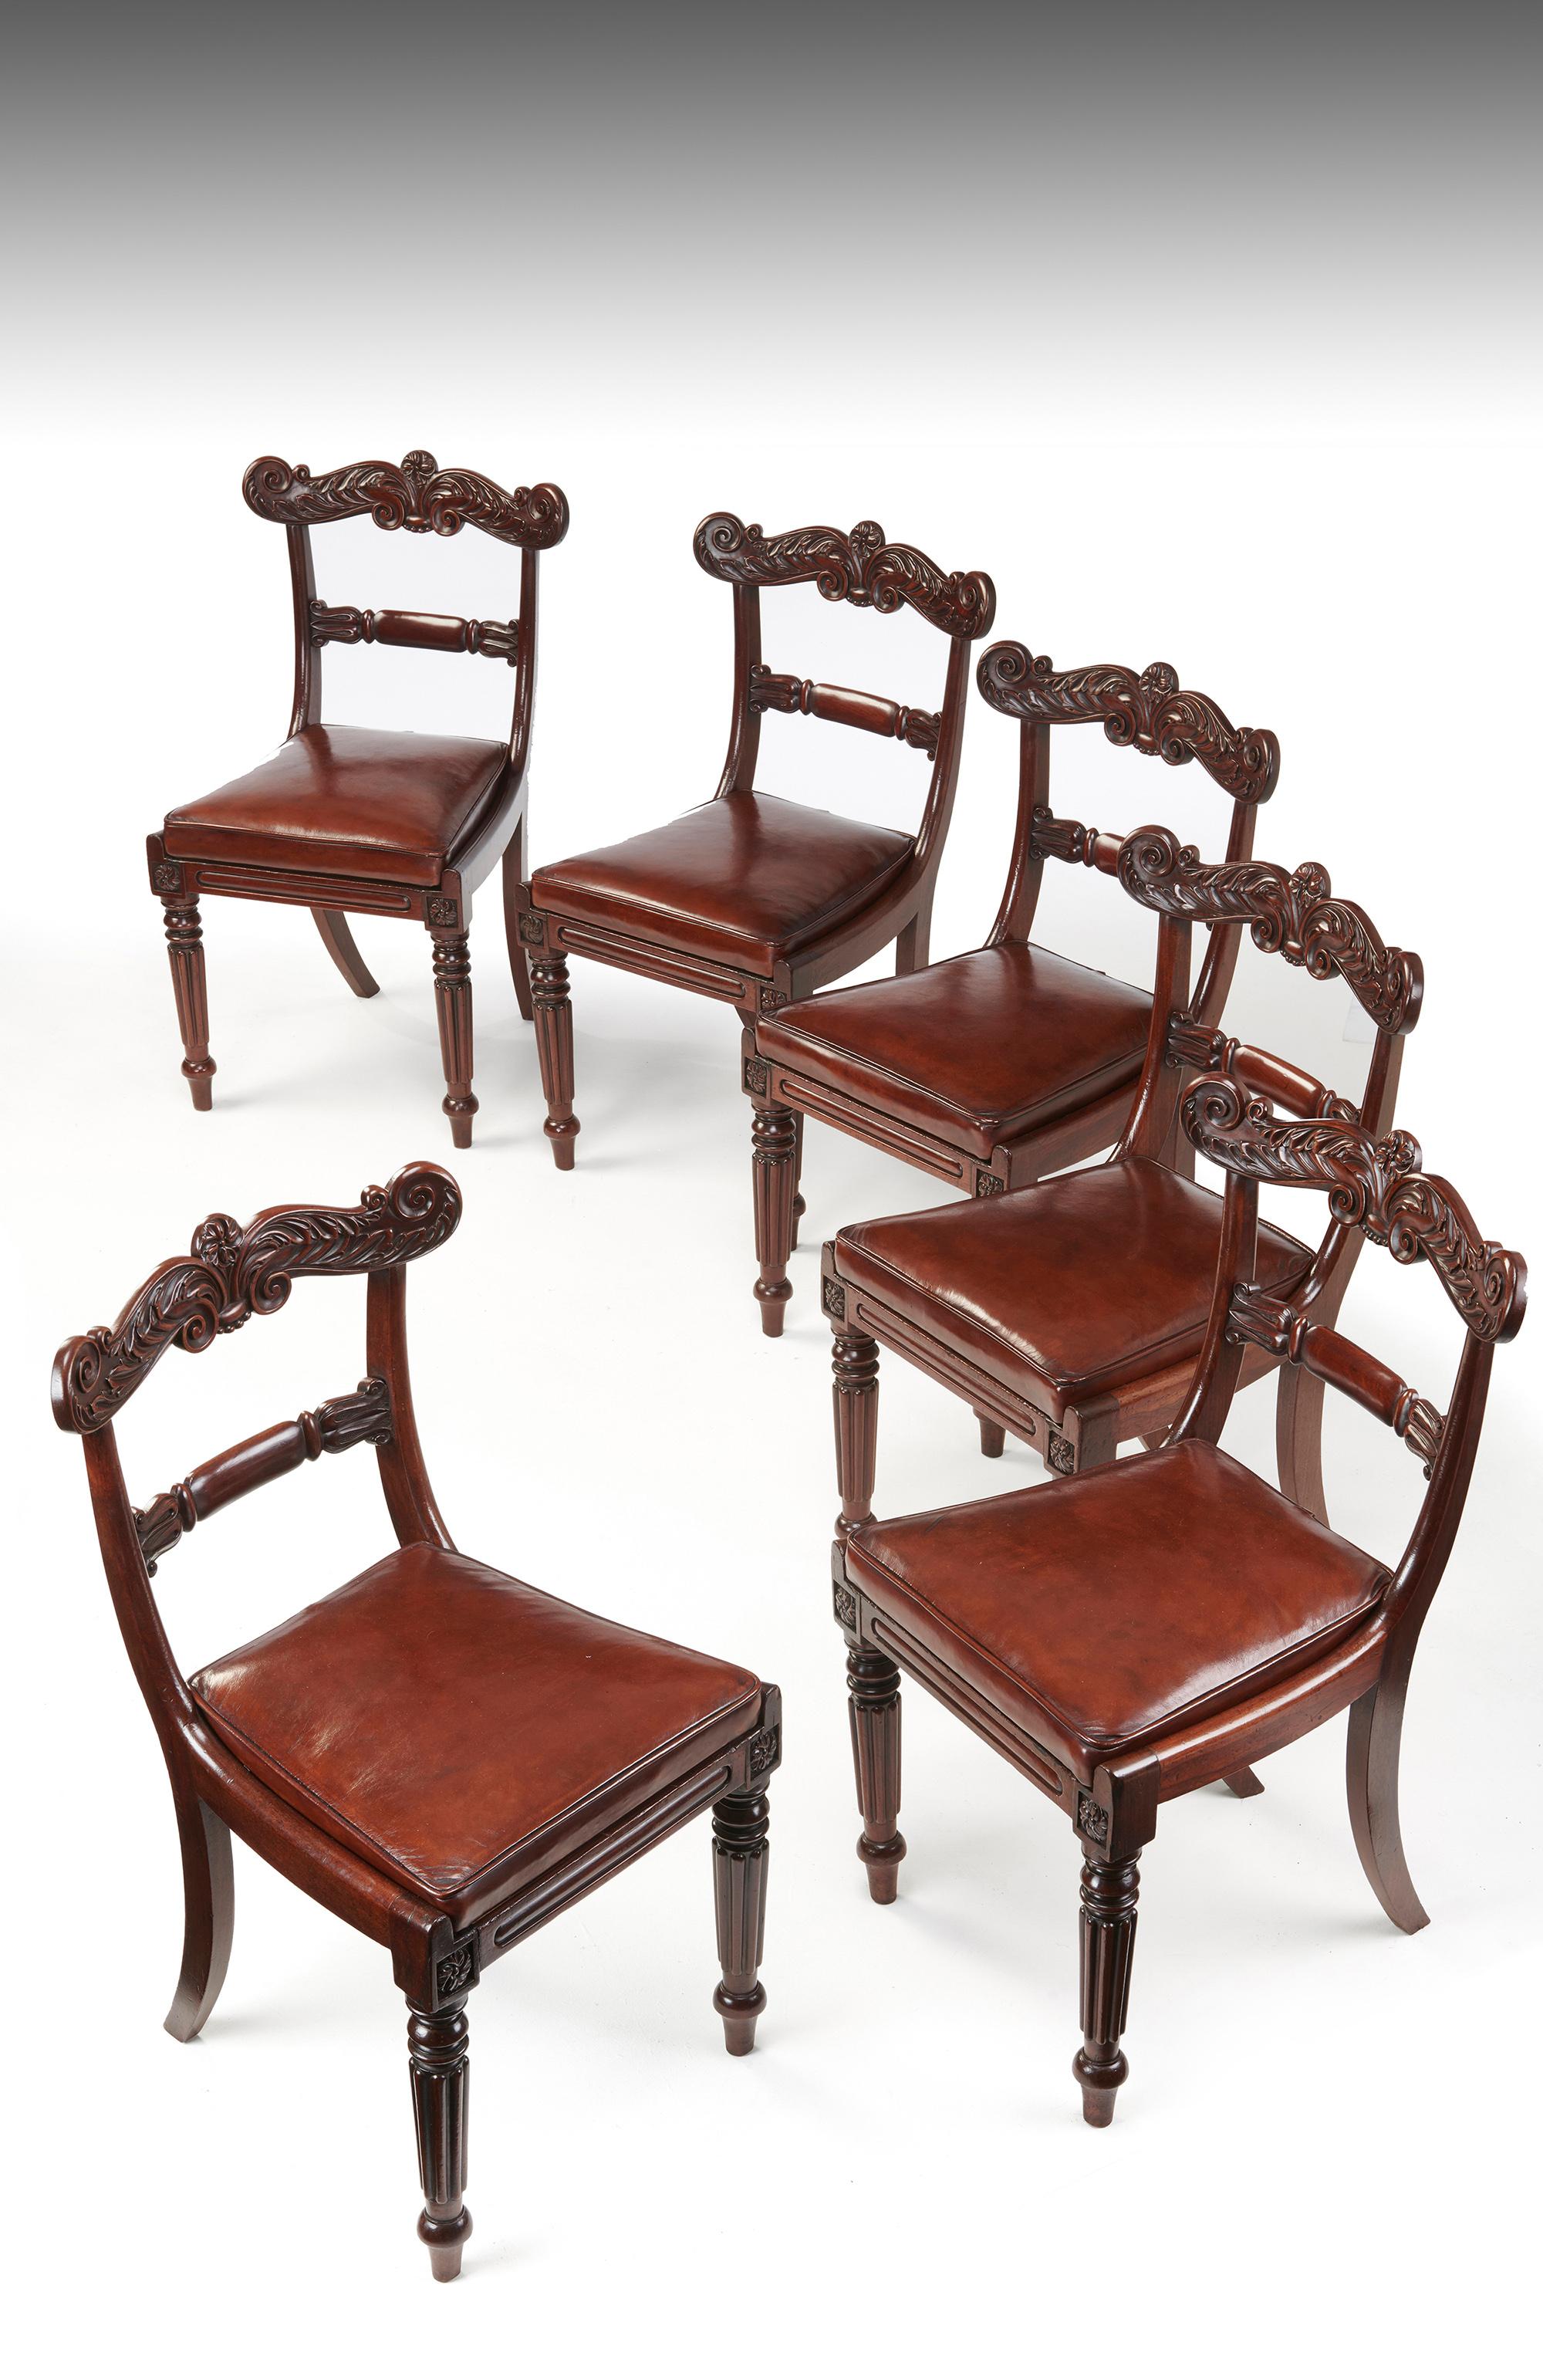 Set of Six William IV Mahogany and Leather Dining Chairs (Englisch)